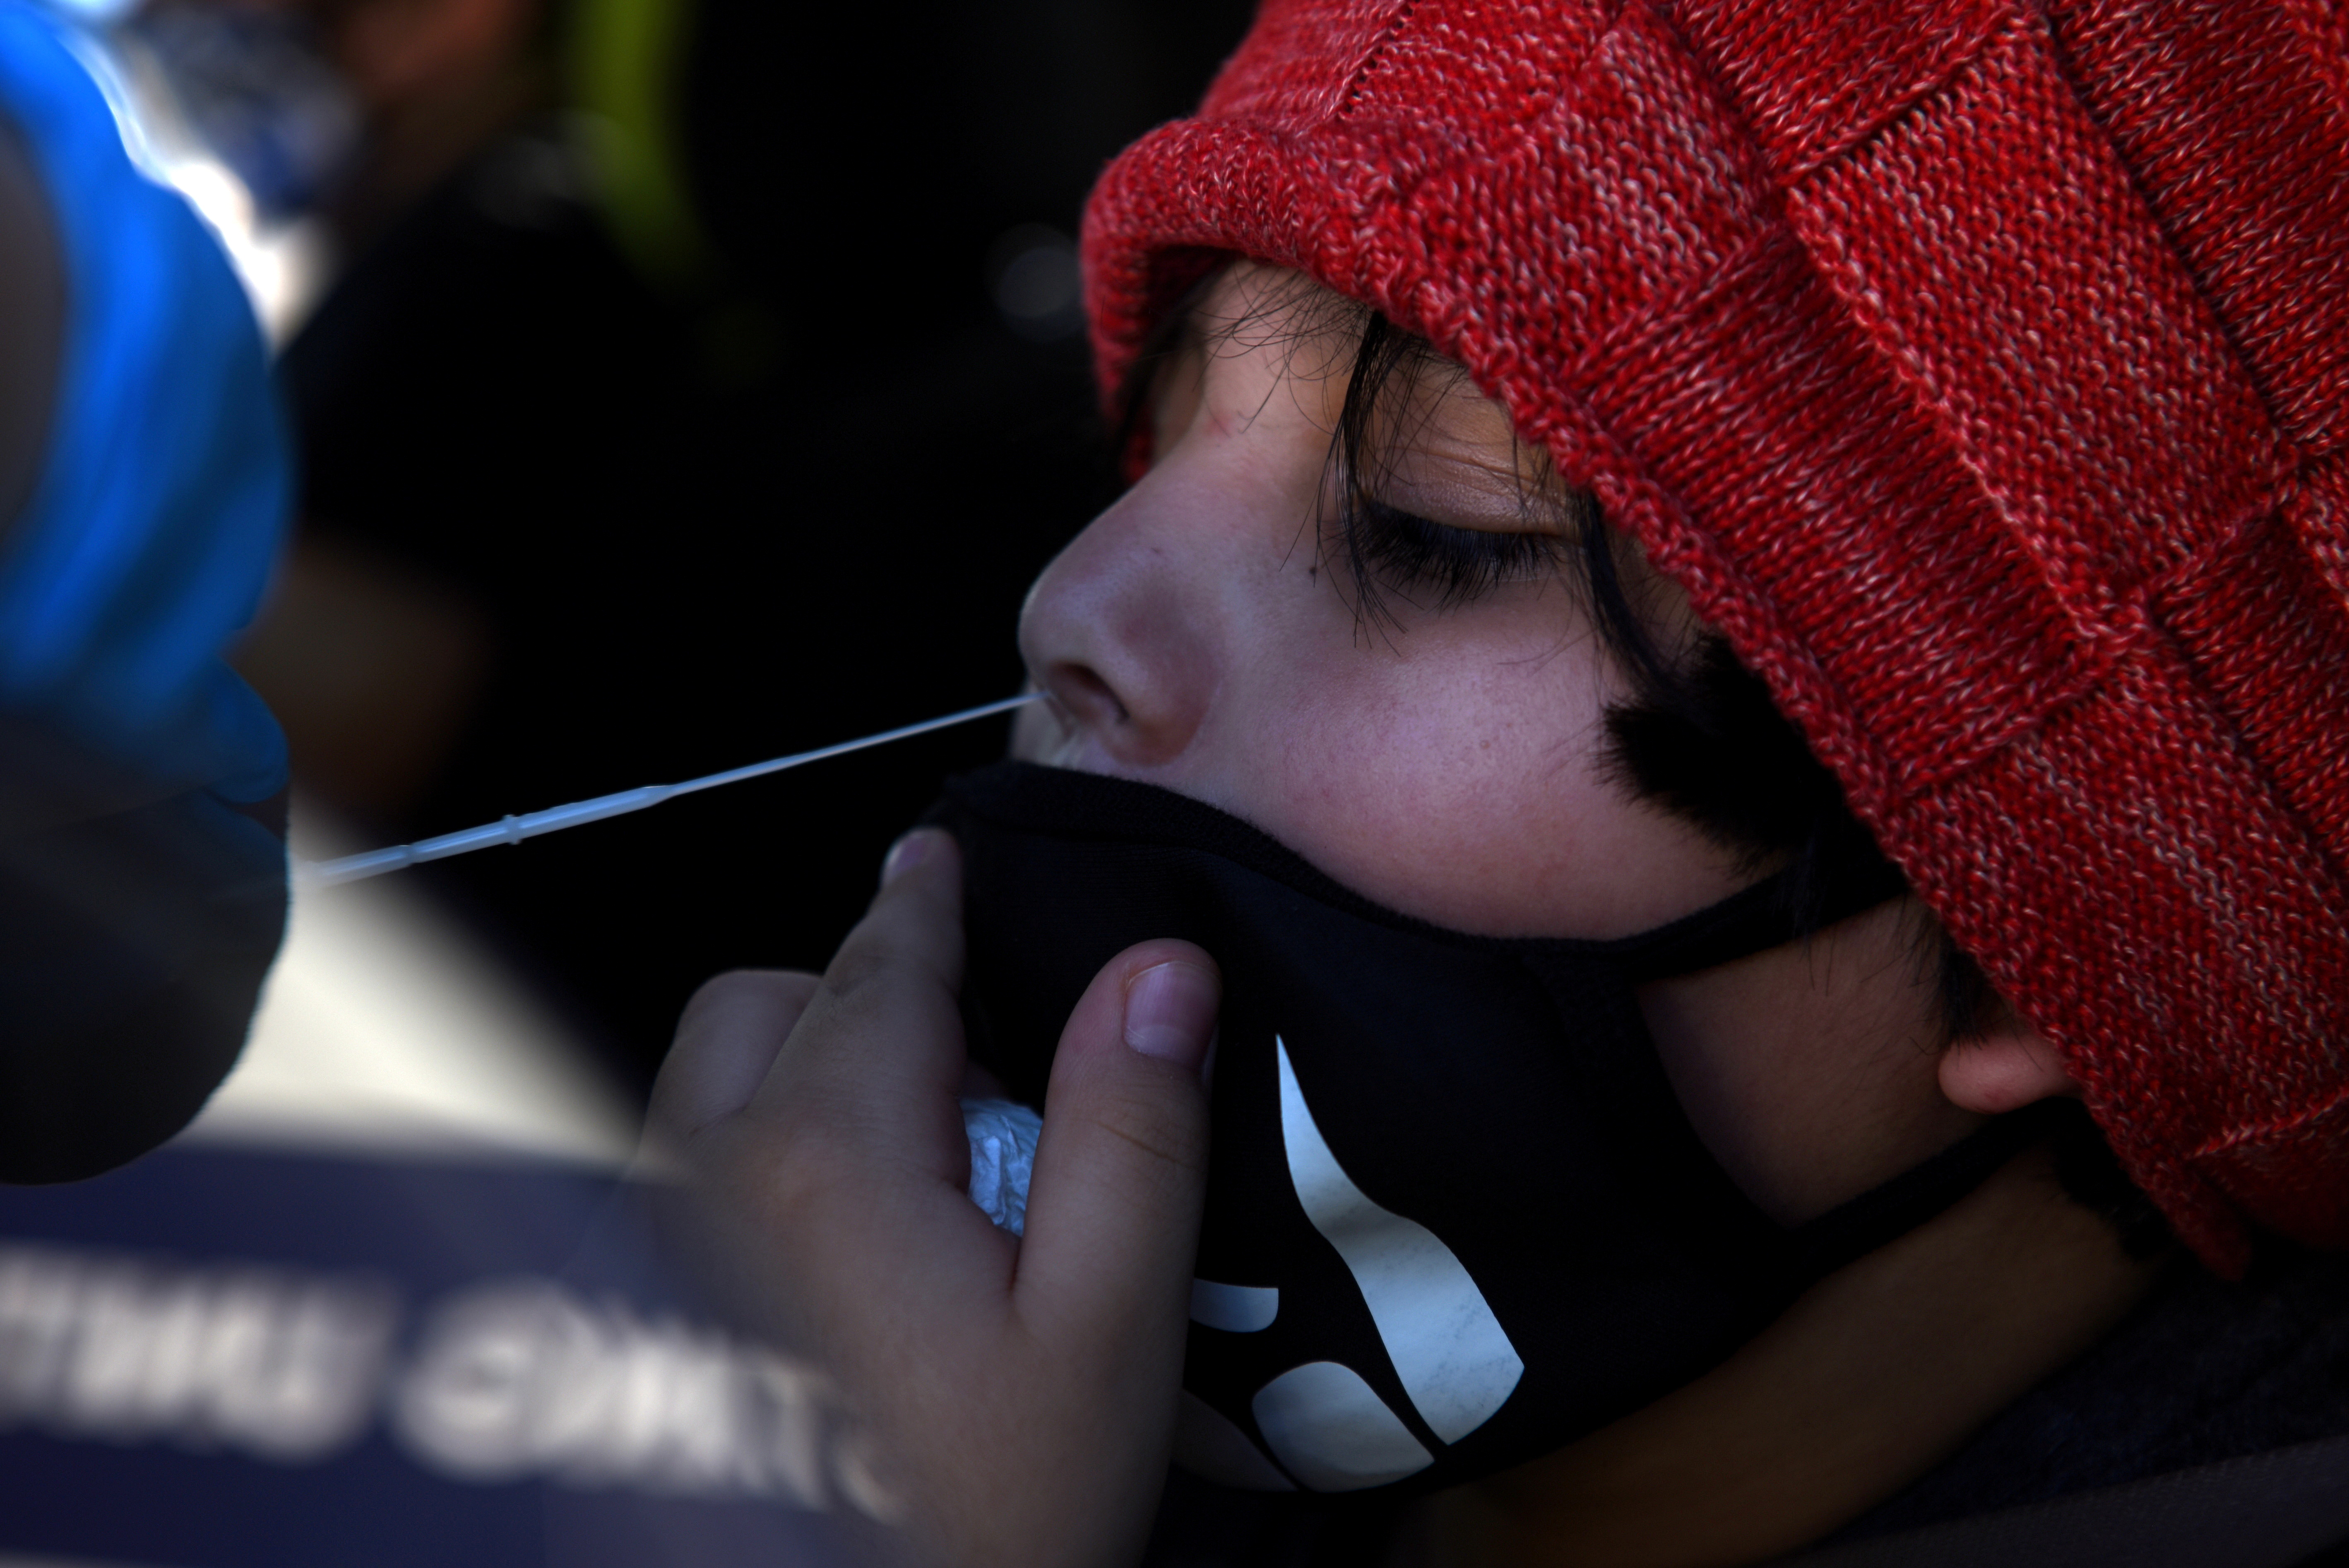 A young boy is tested for the coronavirus disease (COVID-19) at a mobile testing site as the country sees an increase in children infected with COVID-19, in Houston, Texas, U.S., August 16, 2021.  REUTERS/Callaghan O'Hare